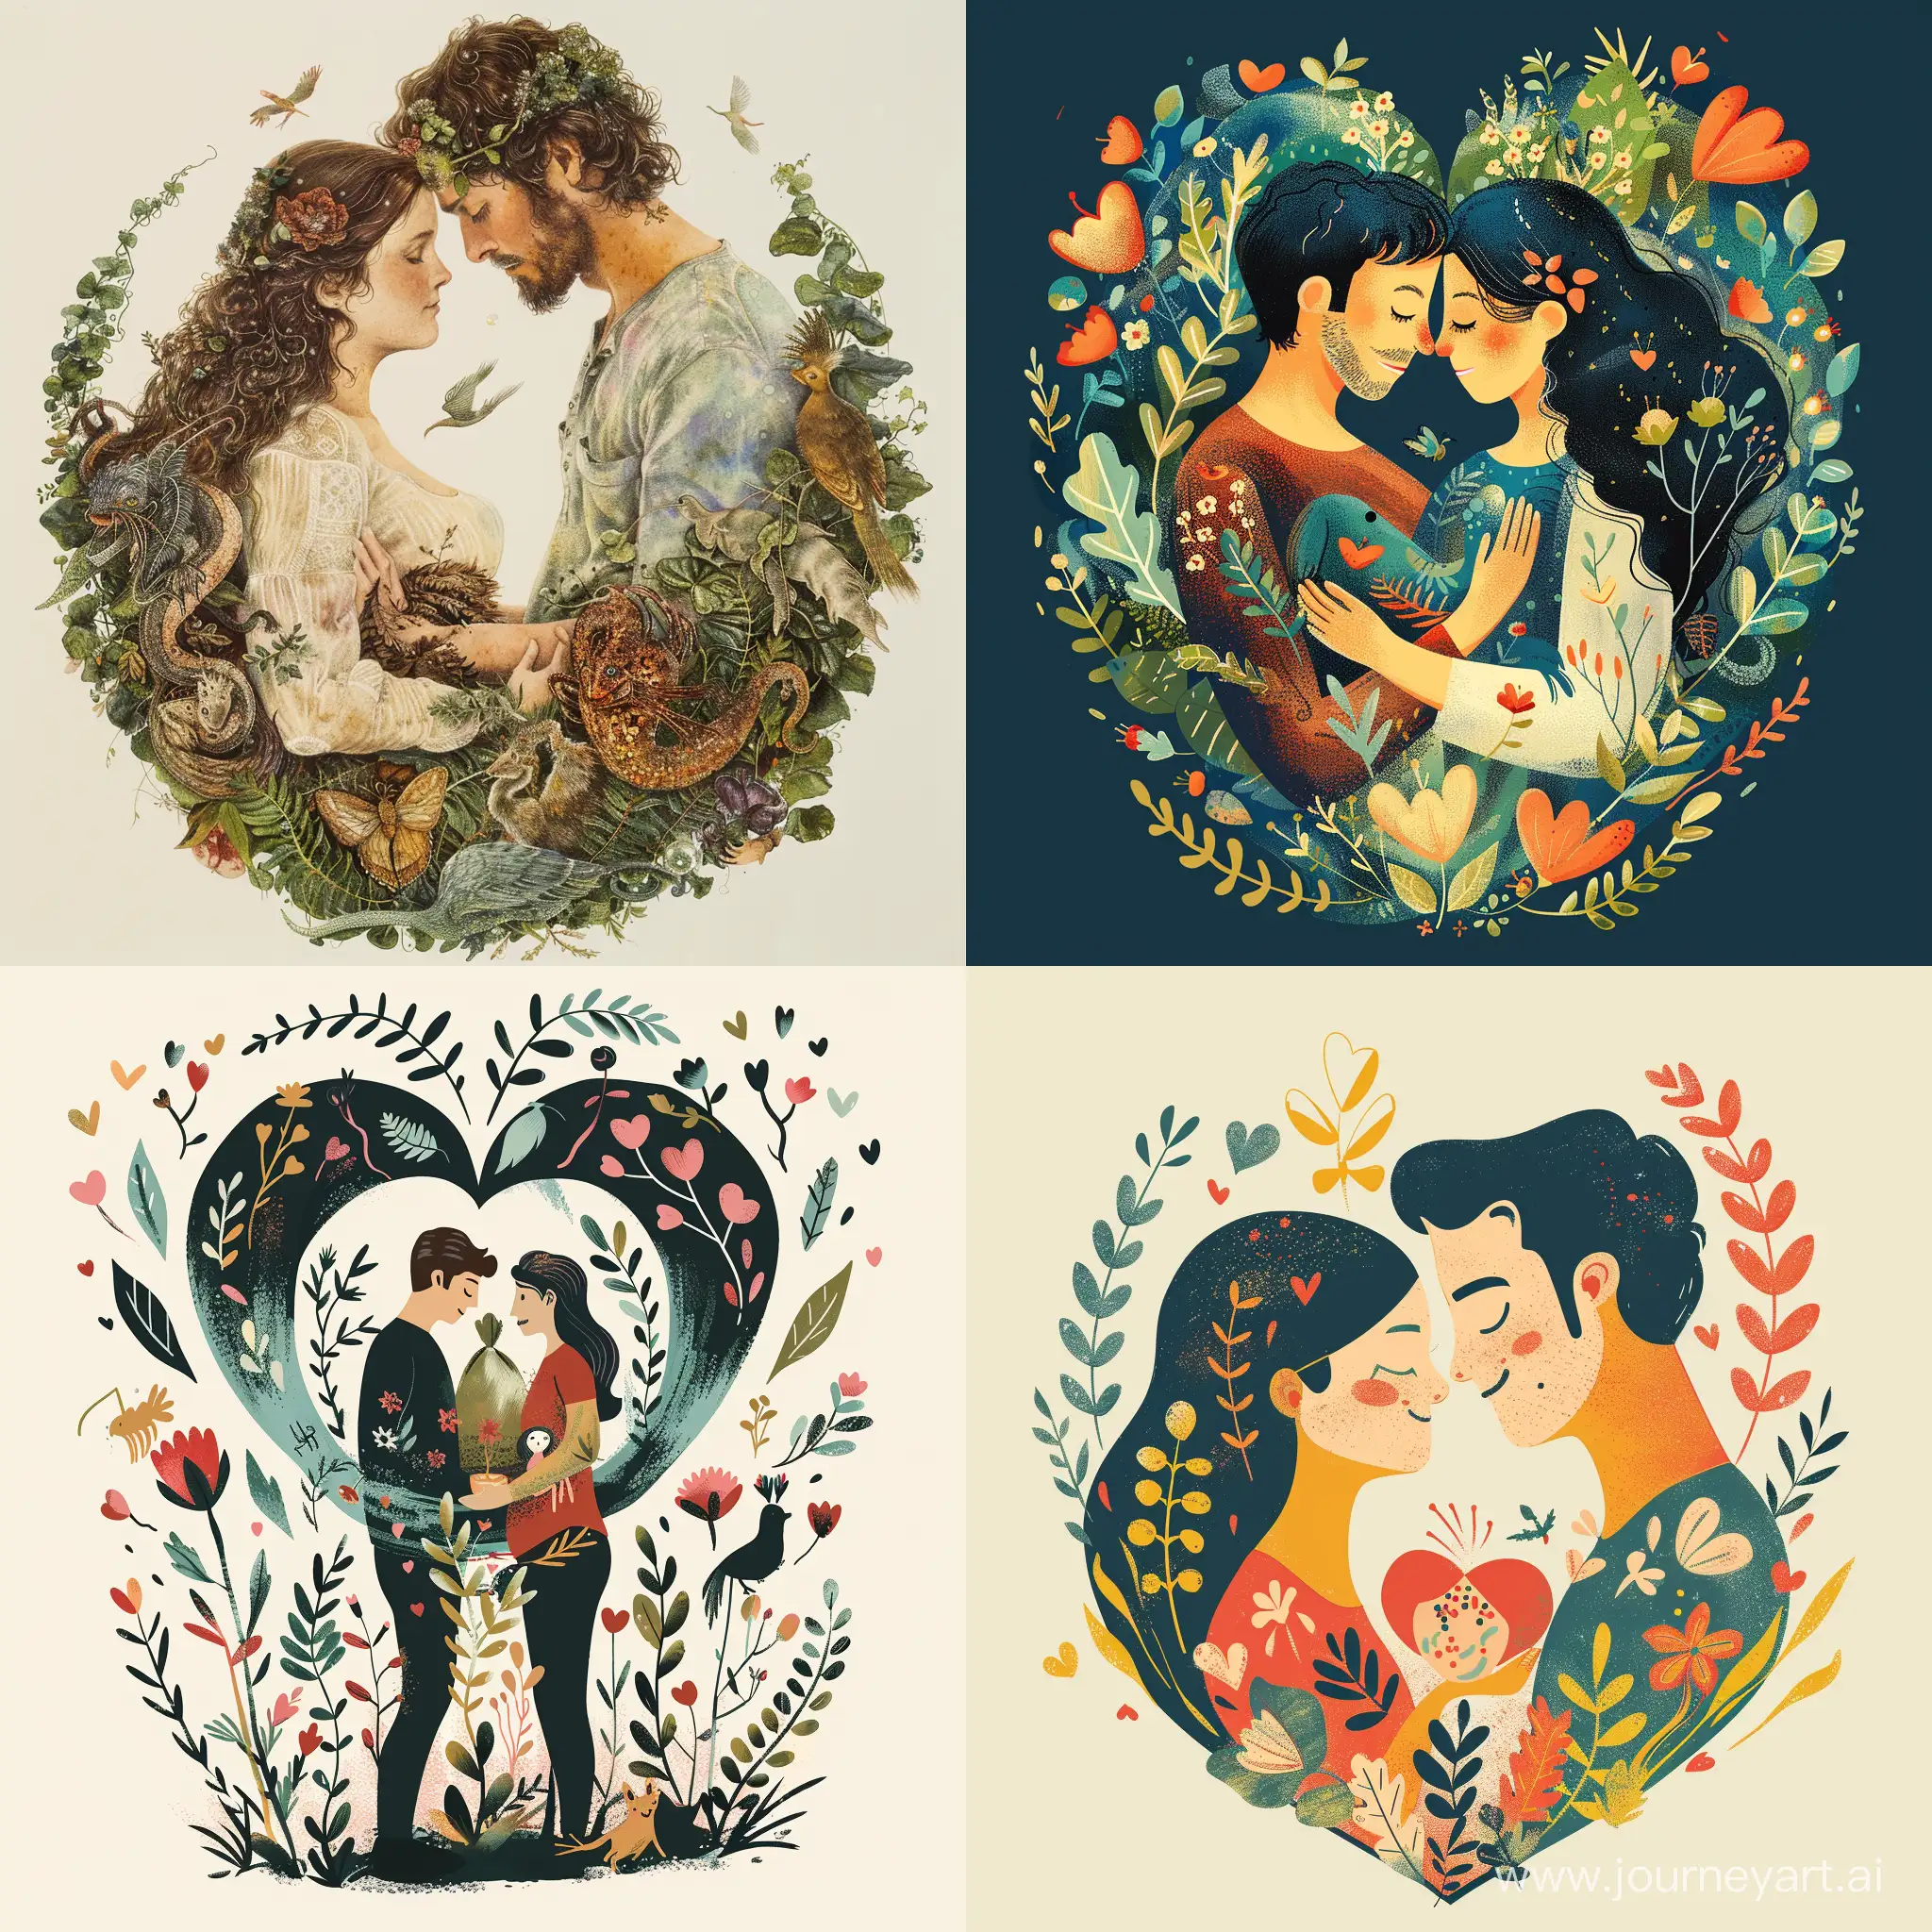 Love Theme Concept: A man and woman share their love for each other and give birth to many living things.